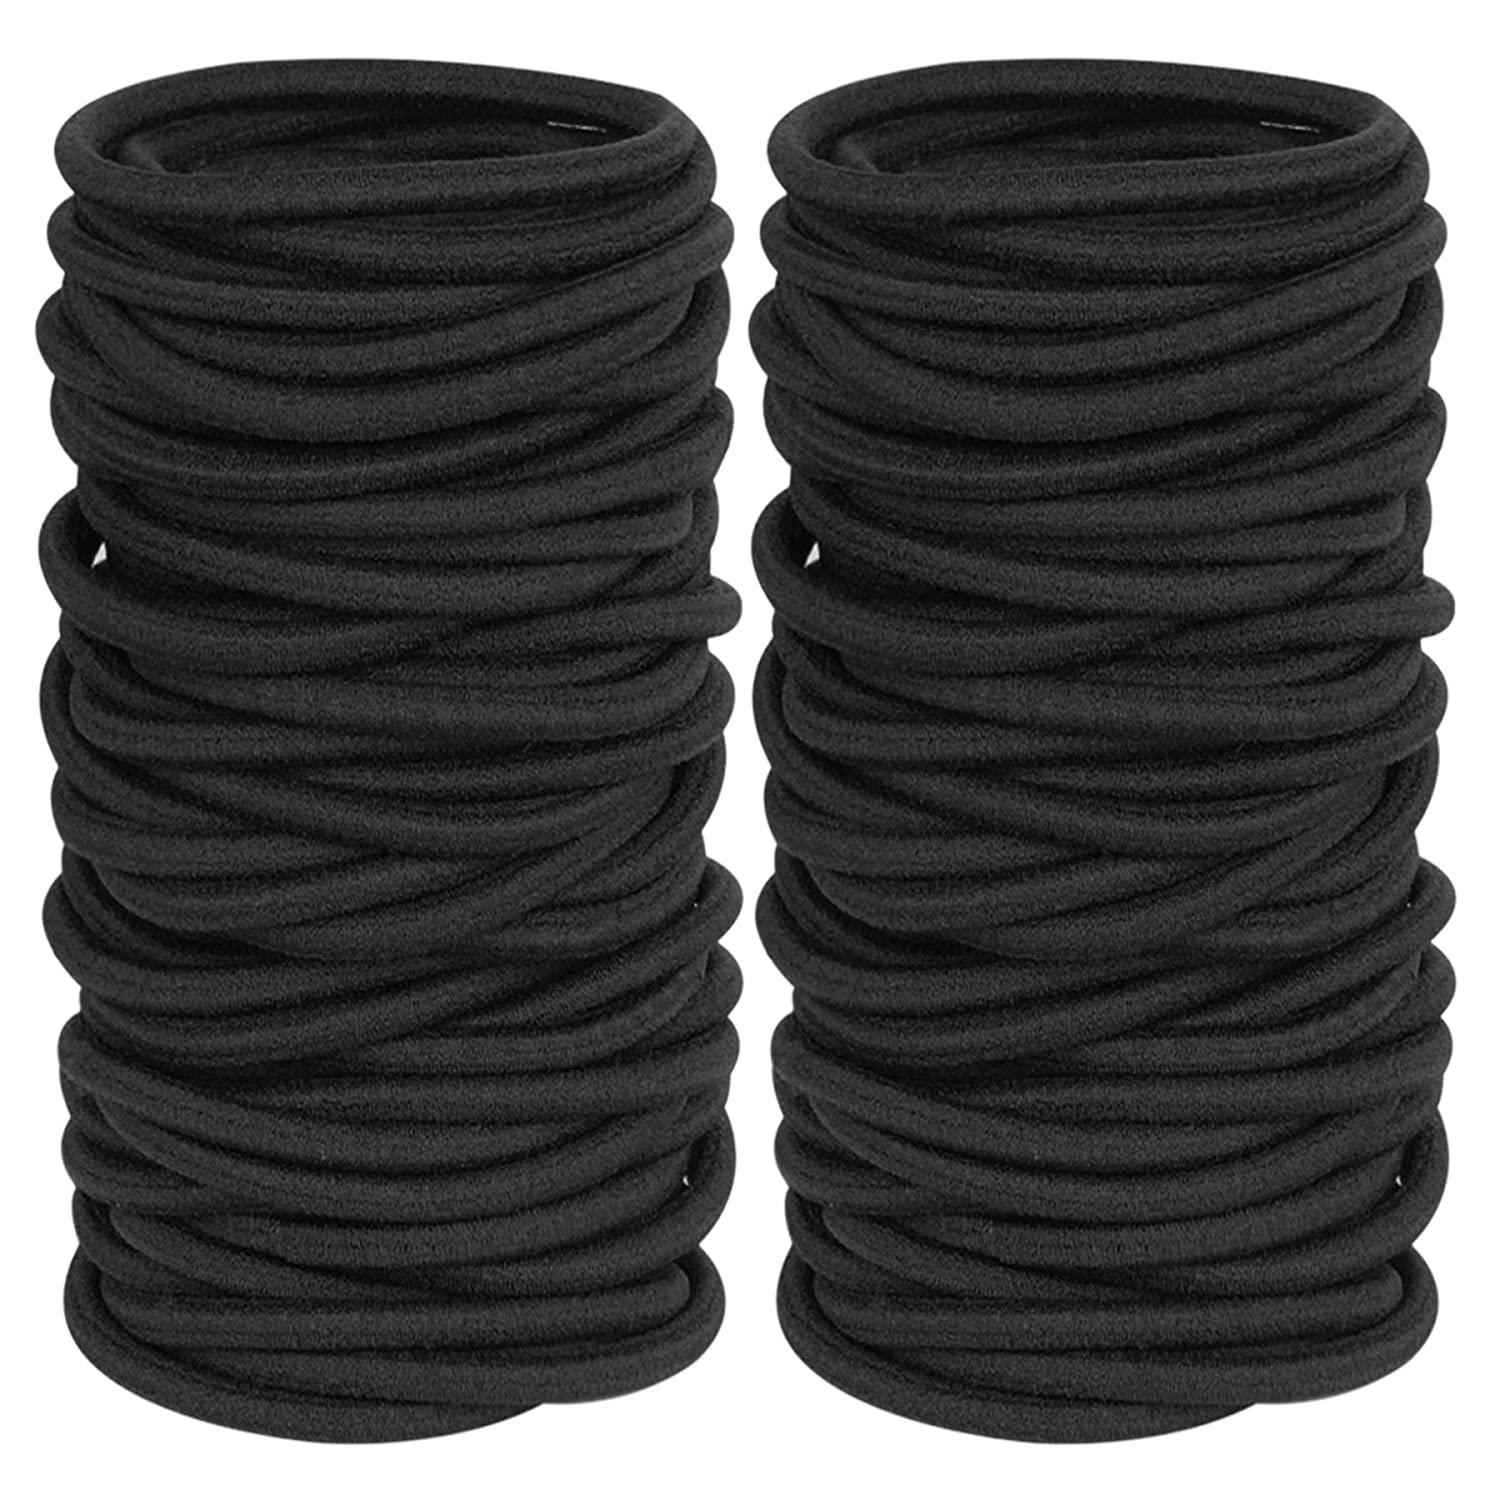 50 Pcs Black Hair Ties, Headbands, Scrunchies for Thick and Curly Hair Ponytail Holders Elastic Hair Band for Women or Men ( 4mm ),Temu